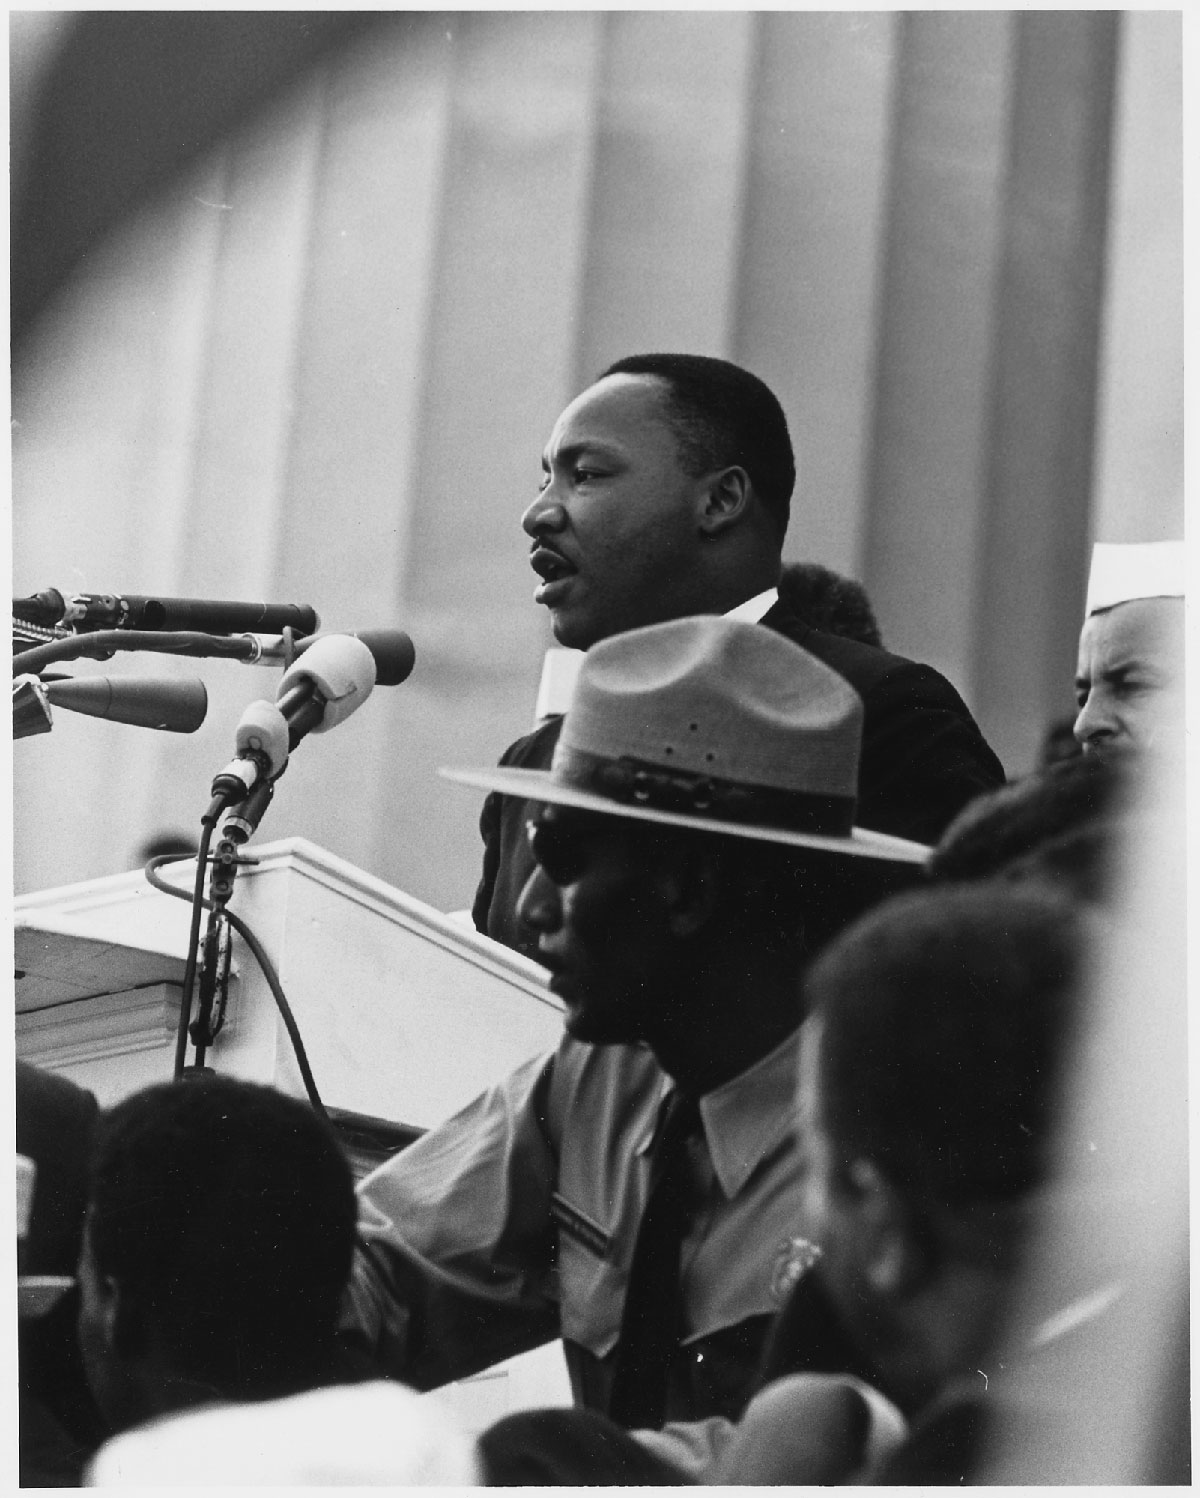 Dr. Martin Luther King, Jr. delivering his I Have a Dream Speech at the Civil Rights March on Washington, D.C. NARA ARC Identifier 542069